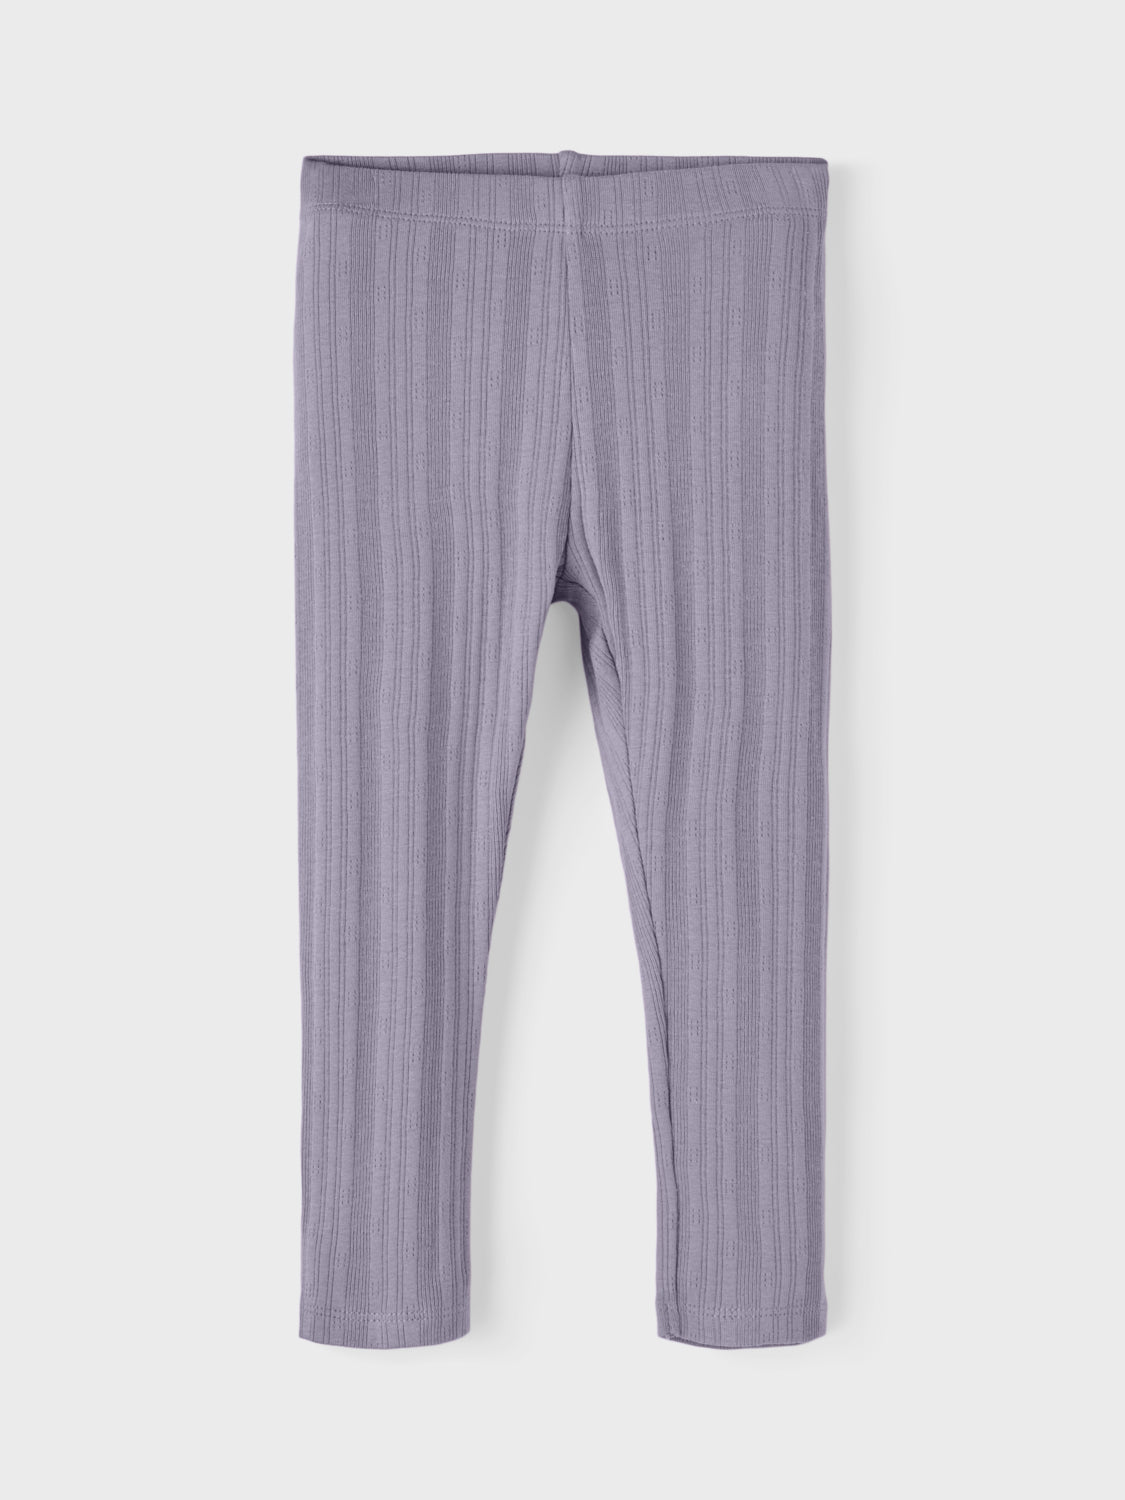 NMFLANNA Trousers - Lavender Gray